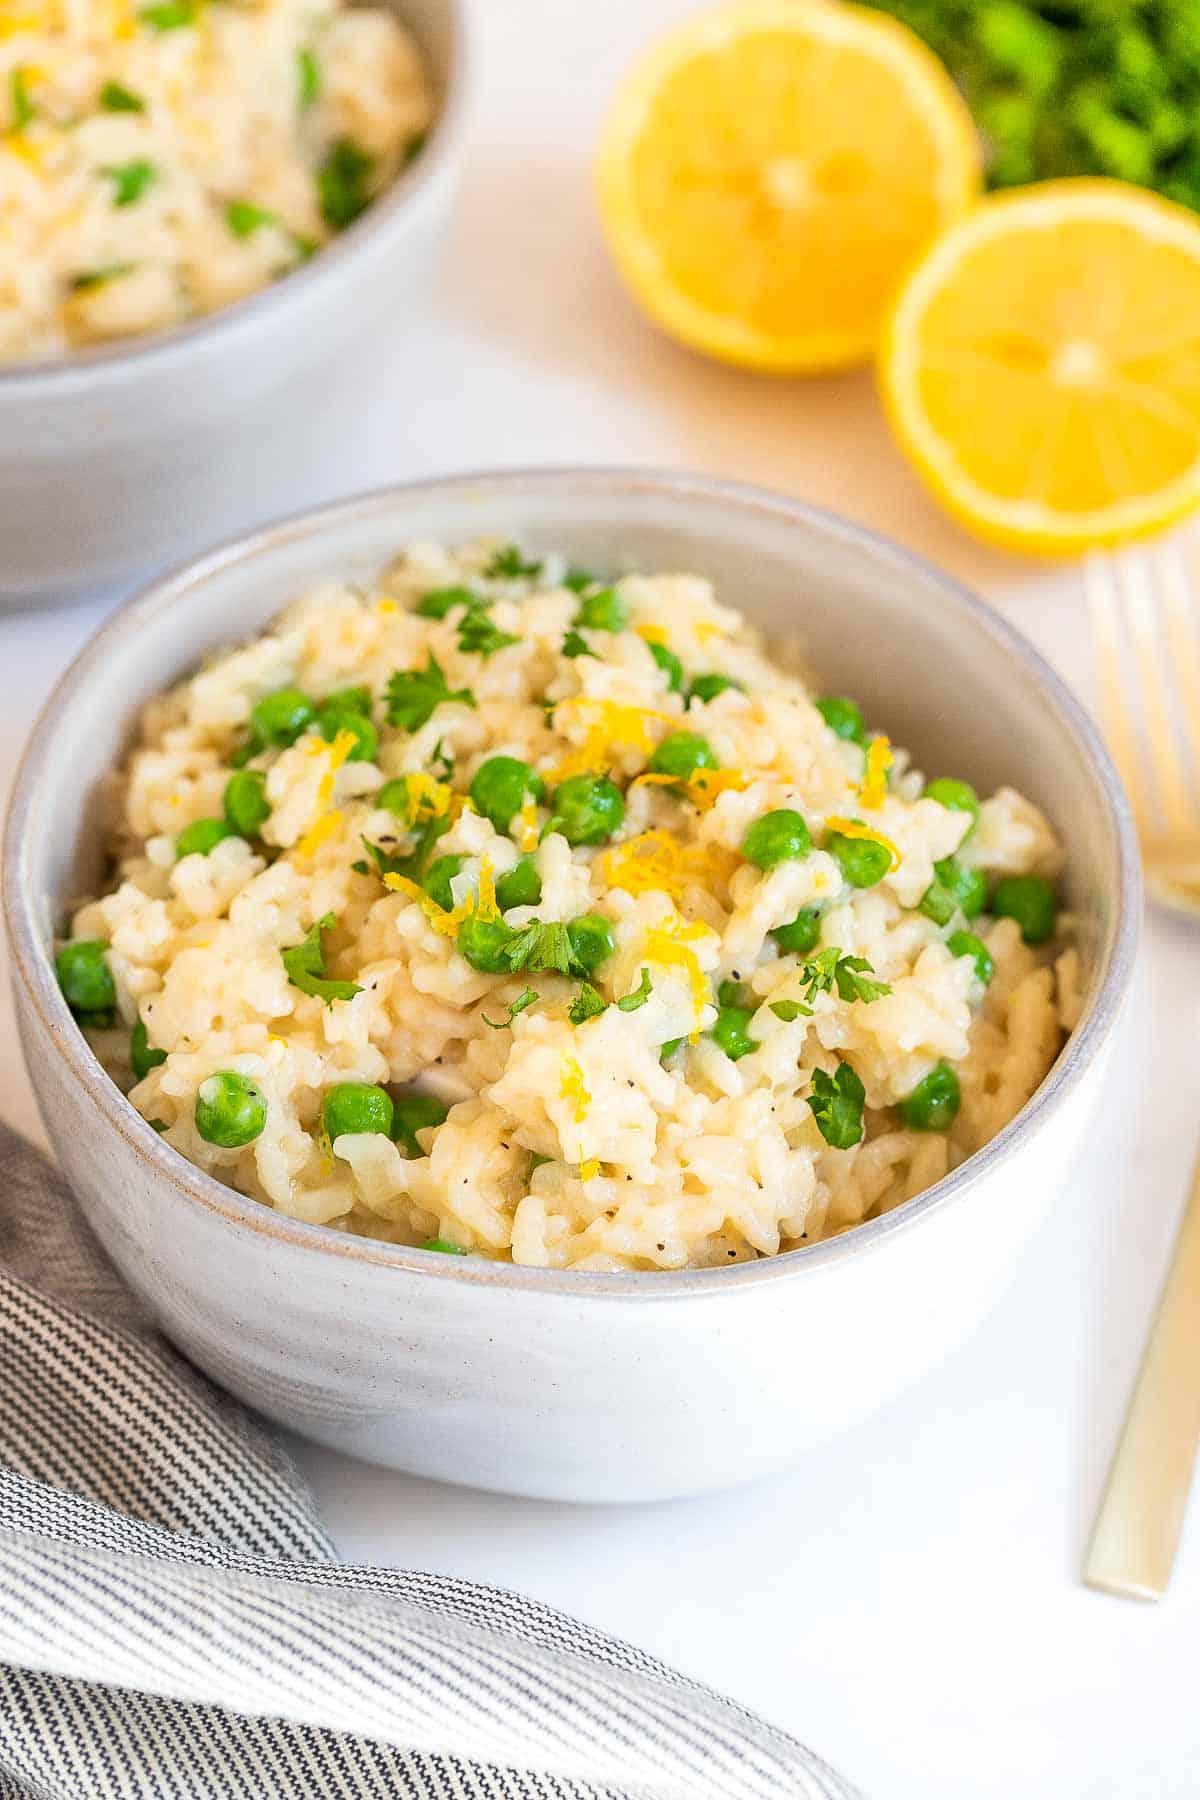 Bowl of risotto rice with peas and garnish with lemon zest.